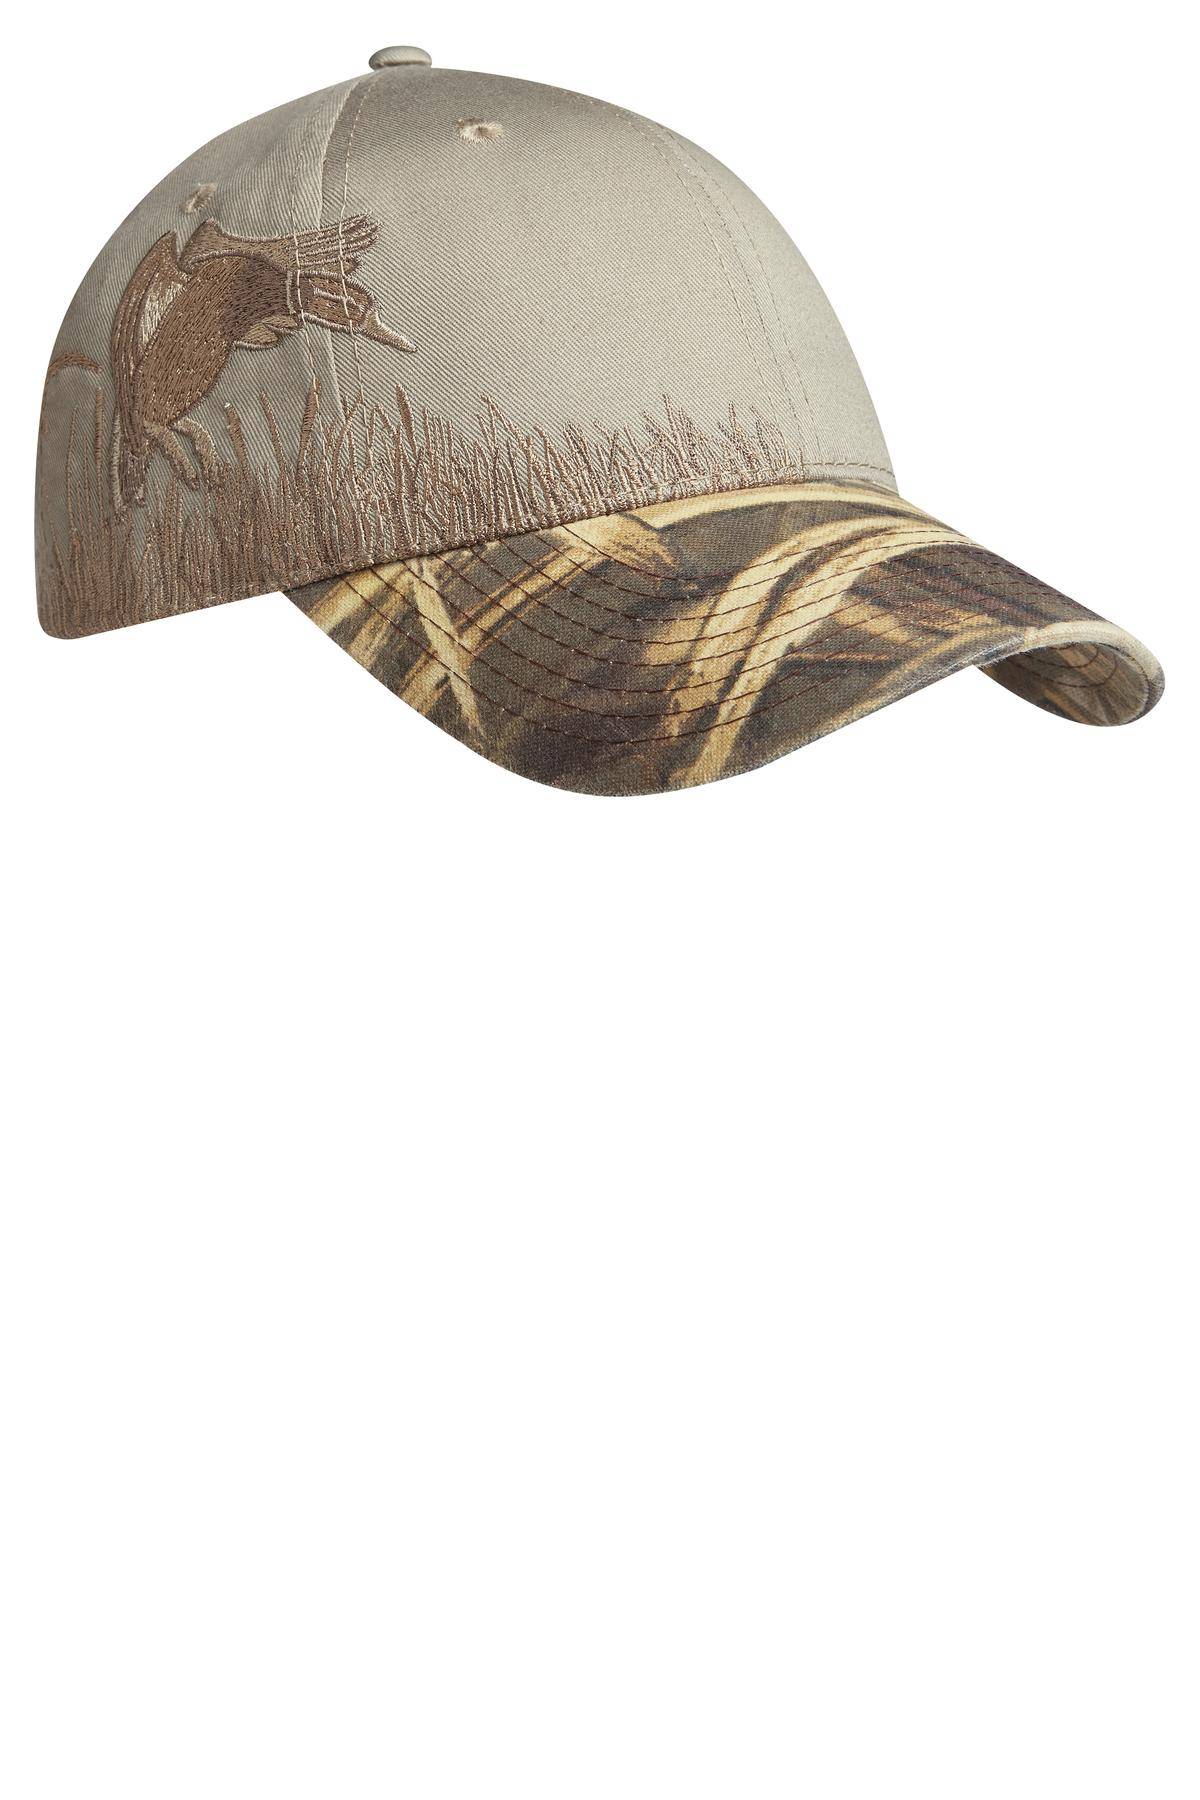 Selected Color is Realtree MAX-5/ Khaki/ Duck